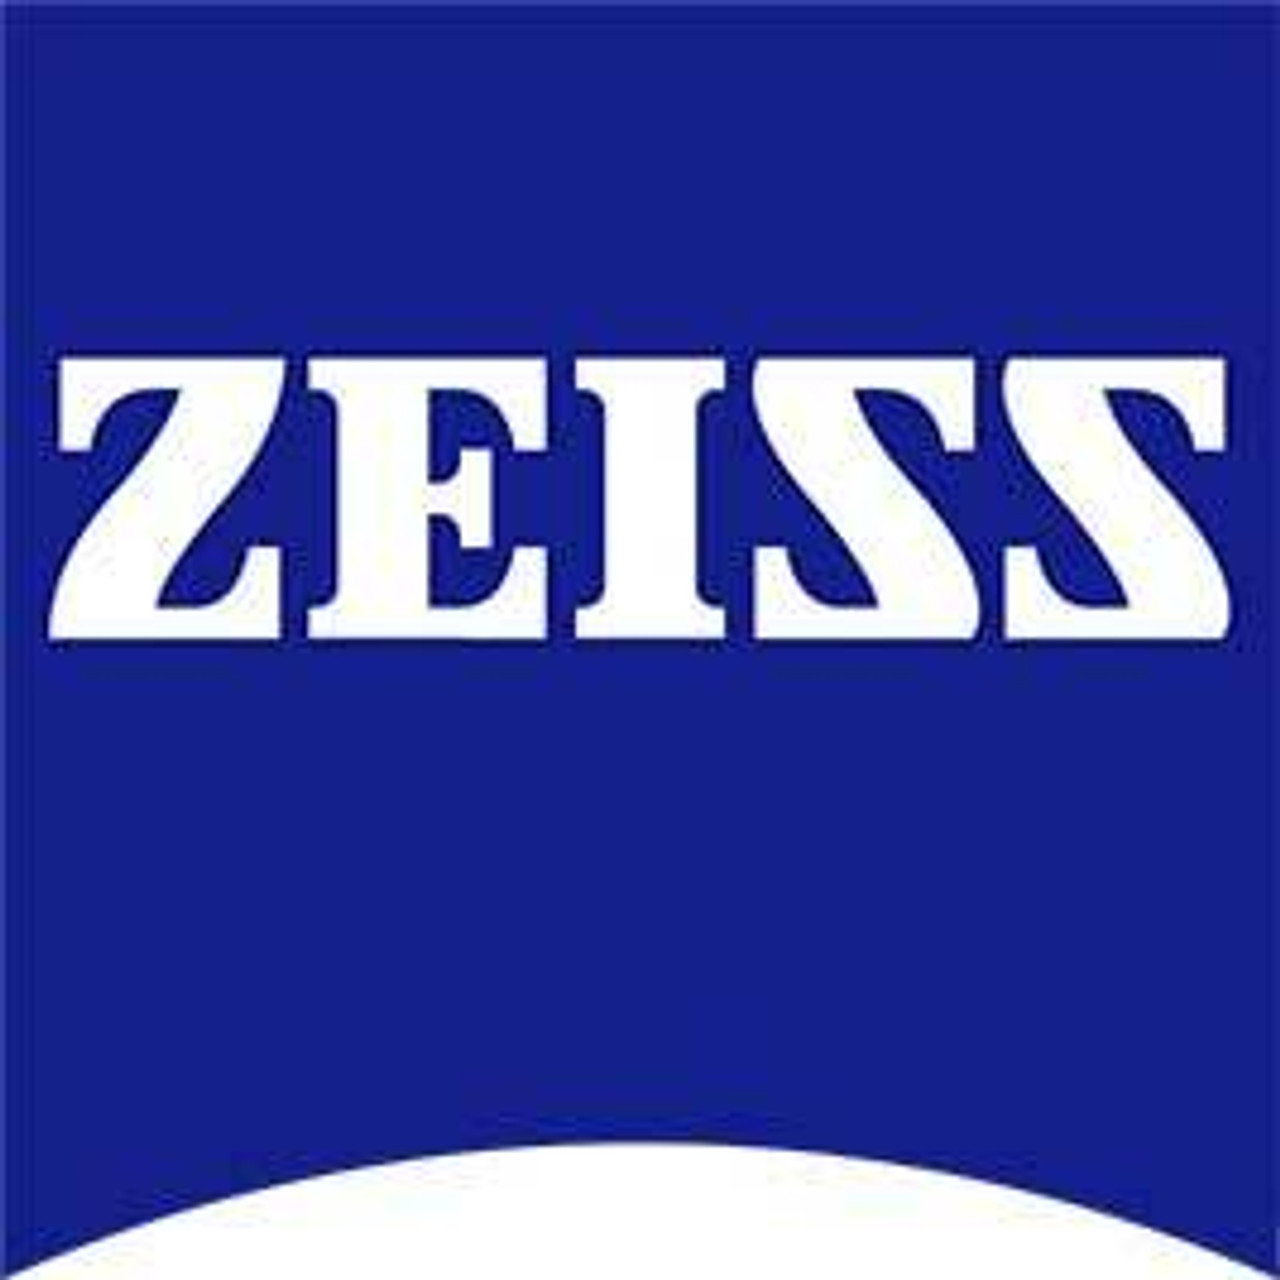 Zeiss Promotions